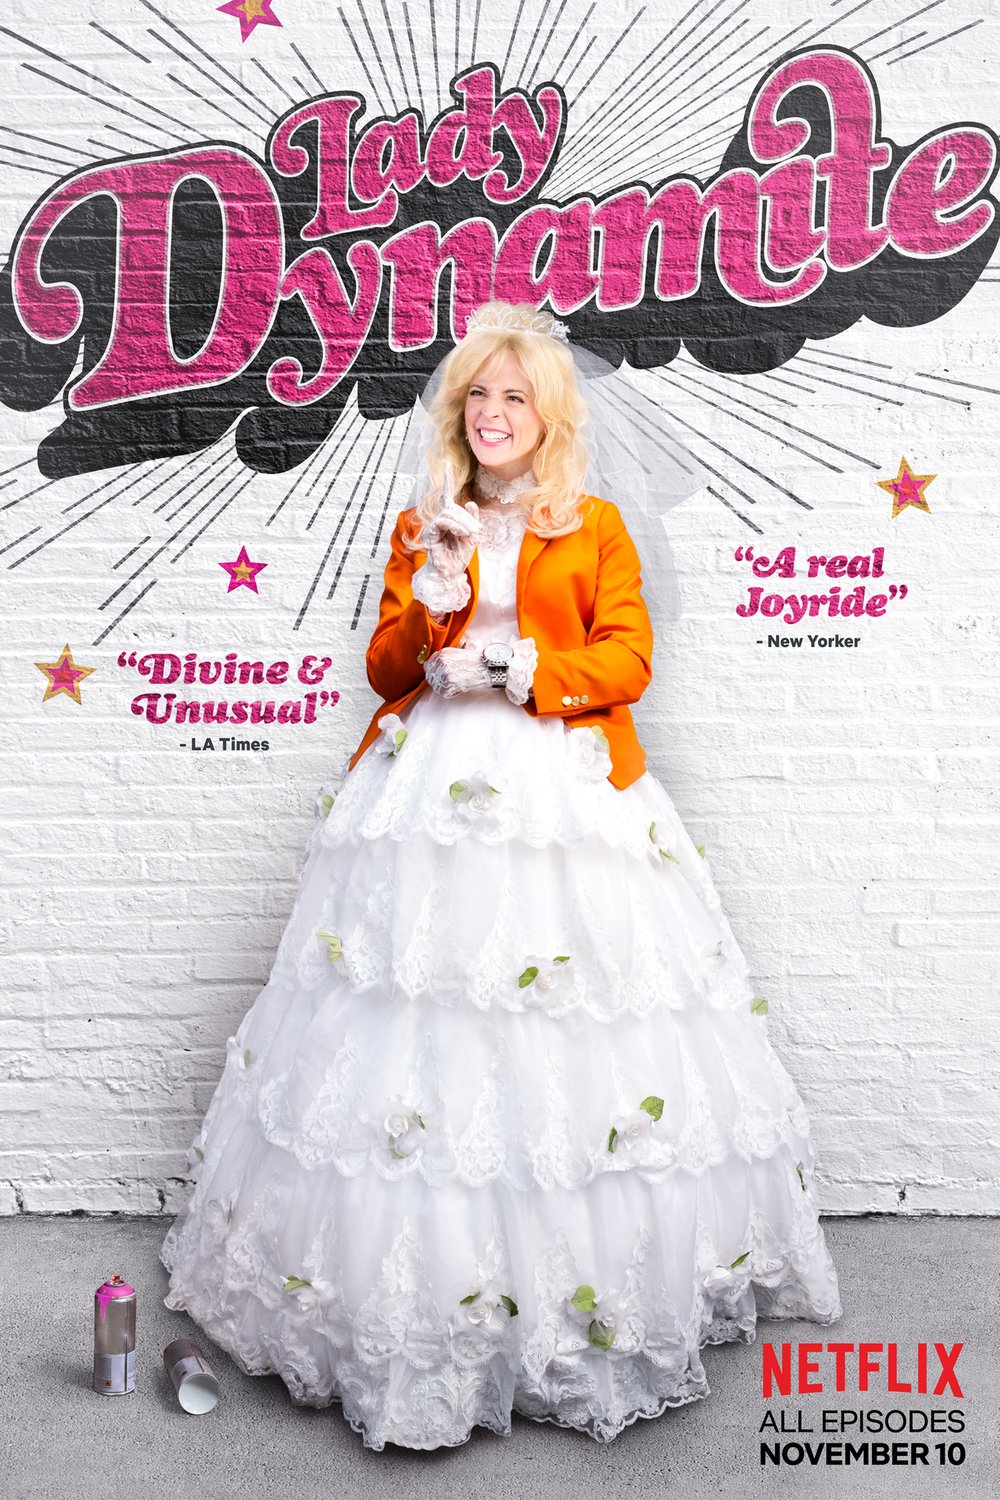 Poster of the movie Lady Dynamite